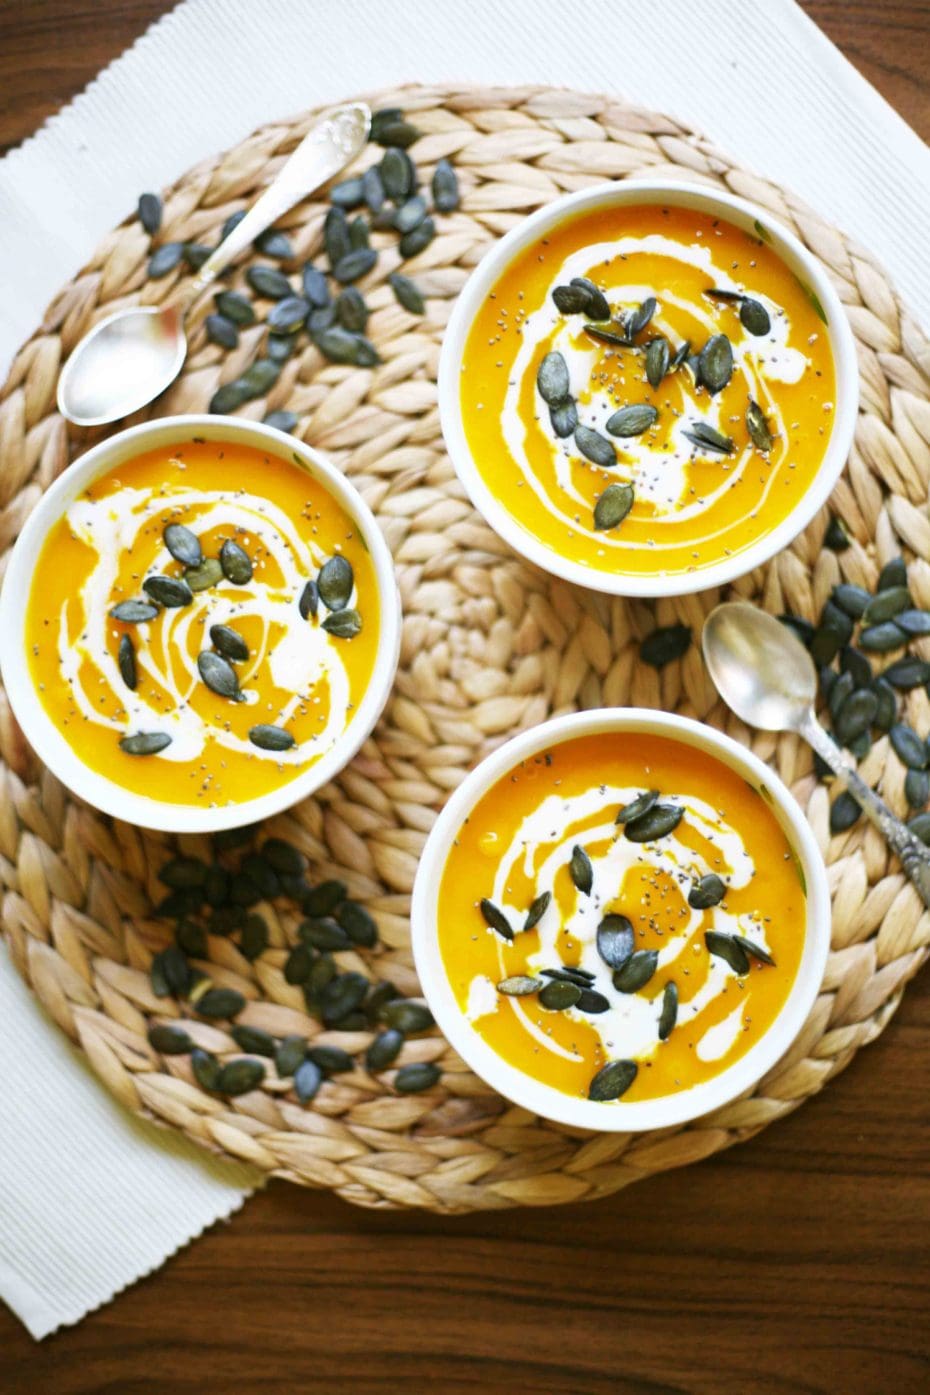 Simple Pumpkin Cream Soup from fresh Hokkaido pumpkin - 3 small bowl of pumpkin soup sprinkled with pumpkin seeds, chia seeds and dairy-free cream poured on top.